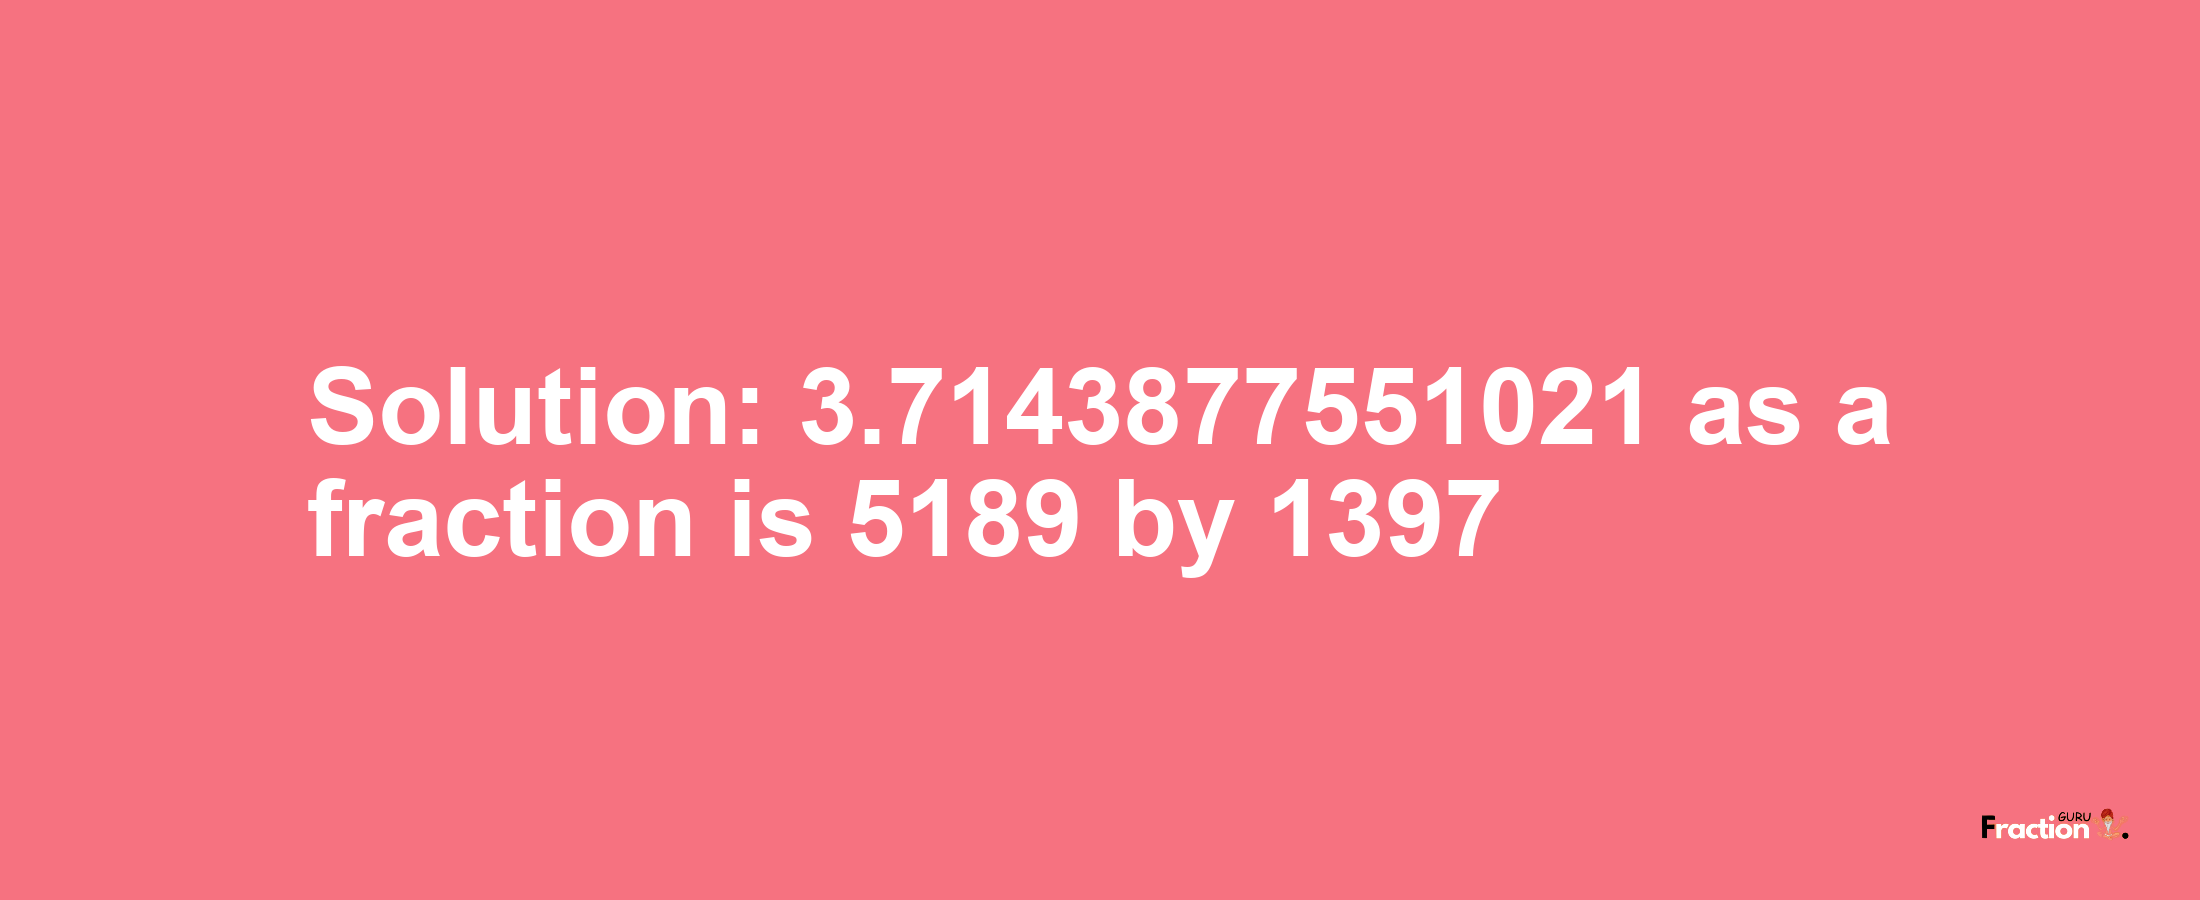 Solution:3.7143877551021 as a fraction is 5189/1397